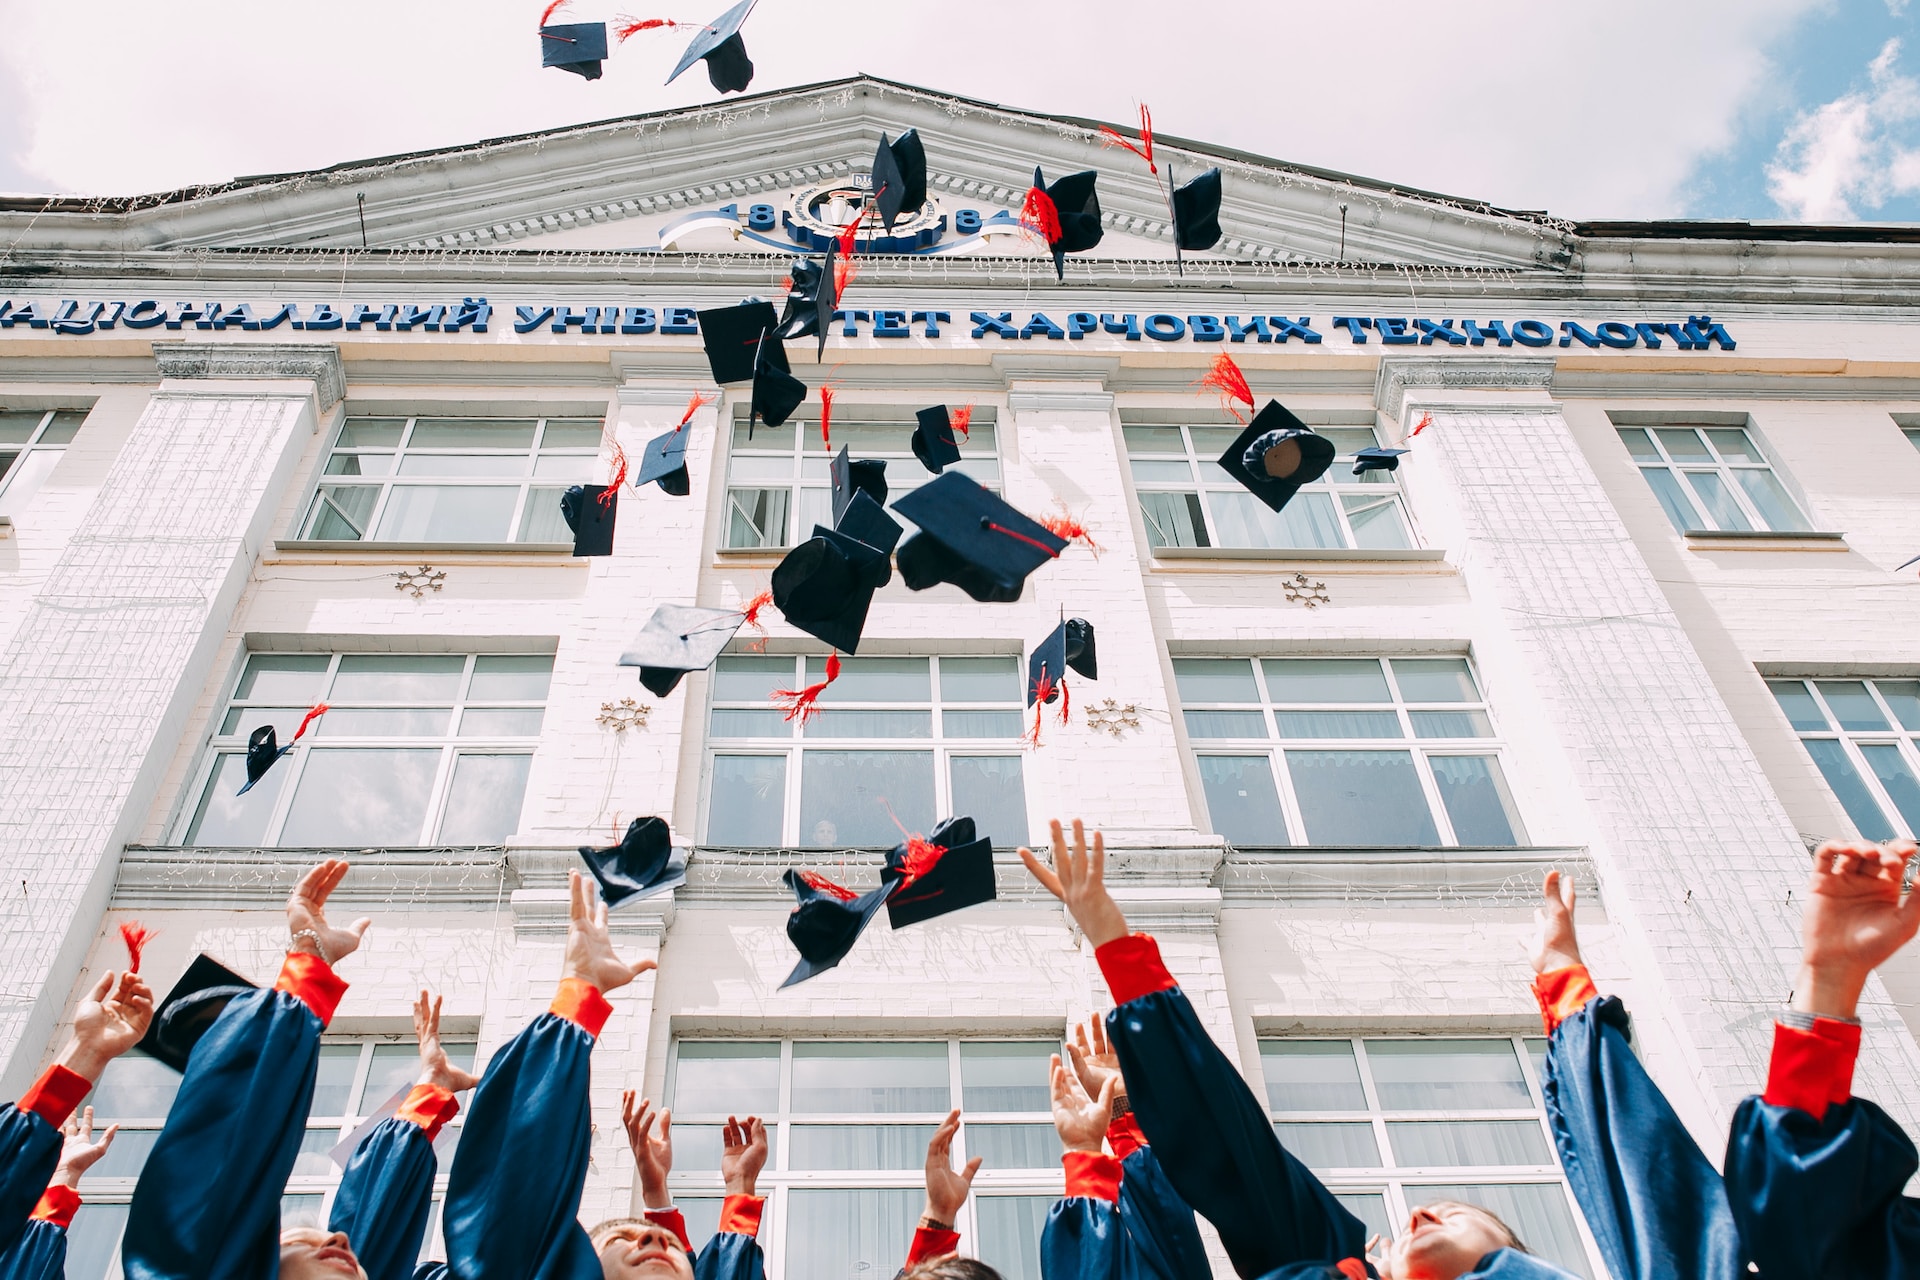 Student outflow. How to retain and return Ukrainian school graduates from abroad